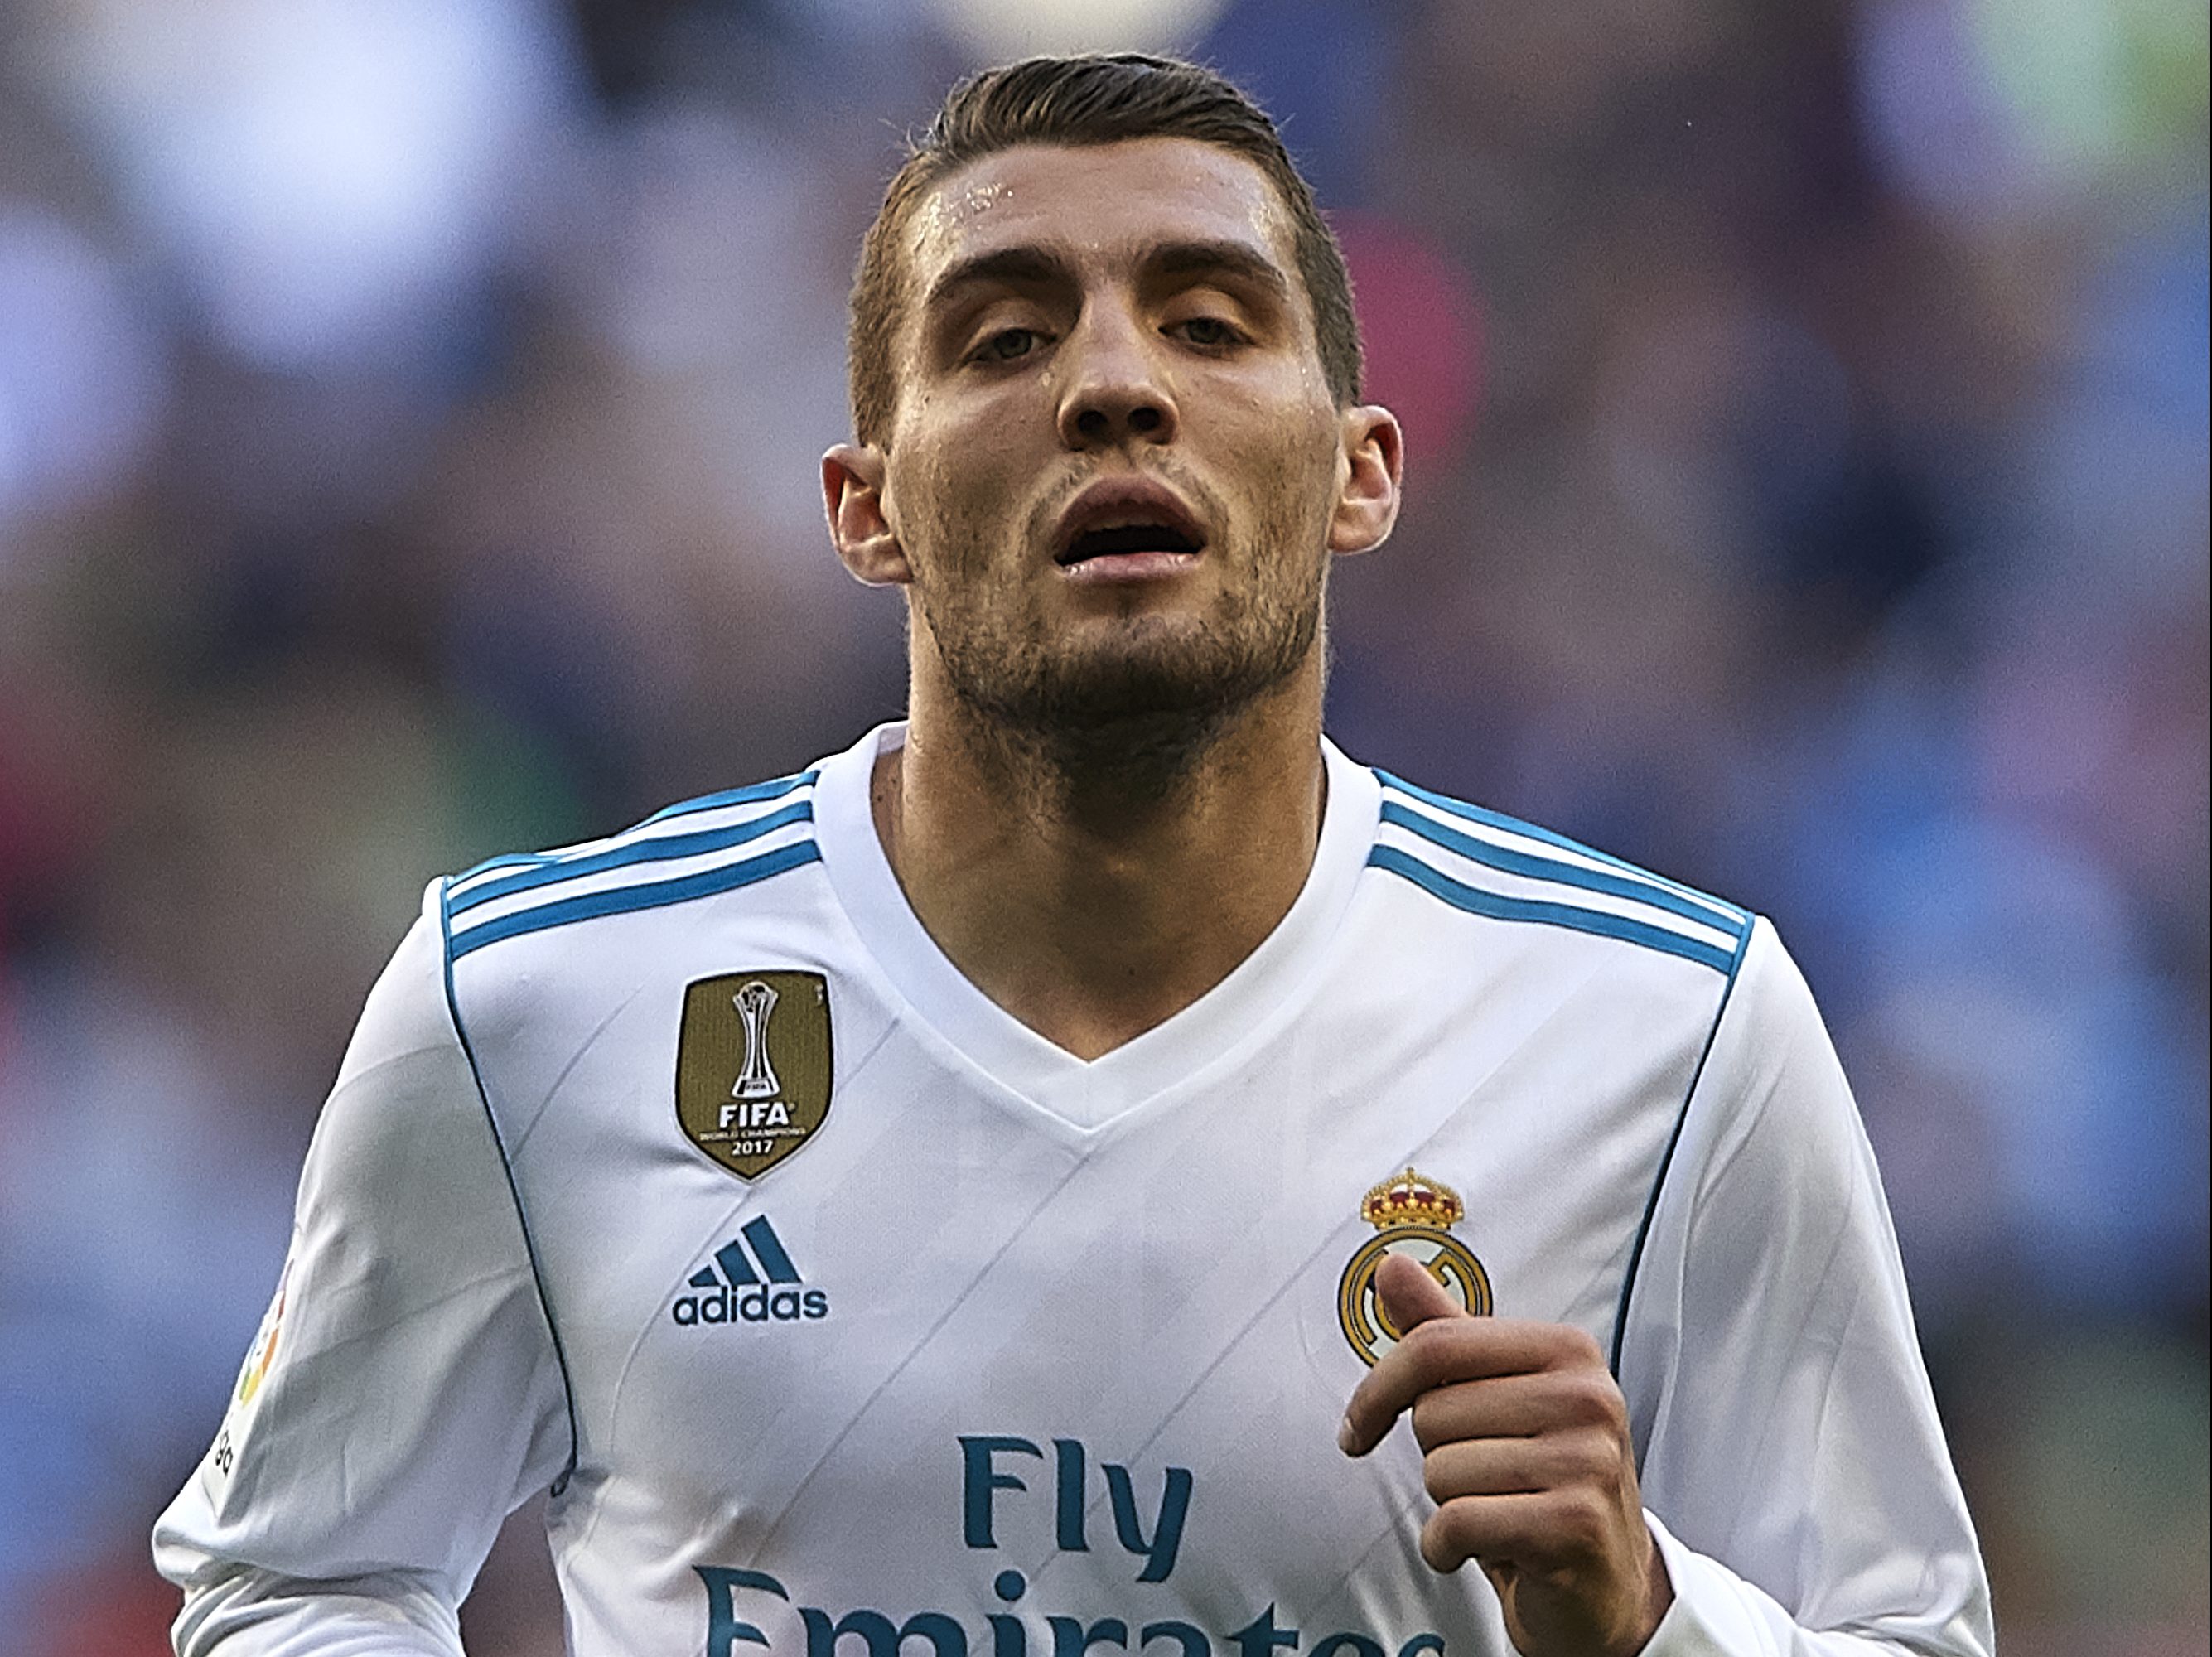 Real Madrid boss Julen Lopetegui speaks out as Mateo Kovacic jets in for Chelsea medical